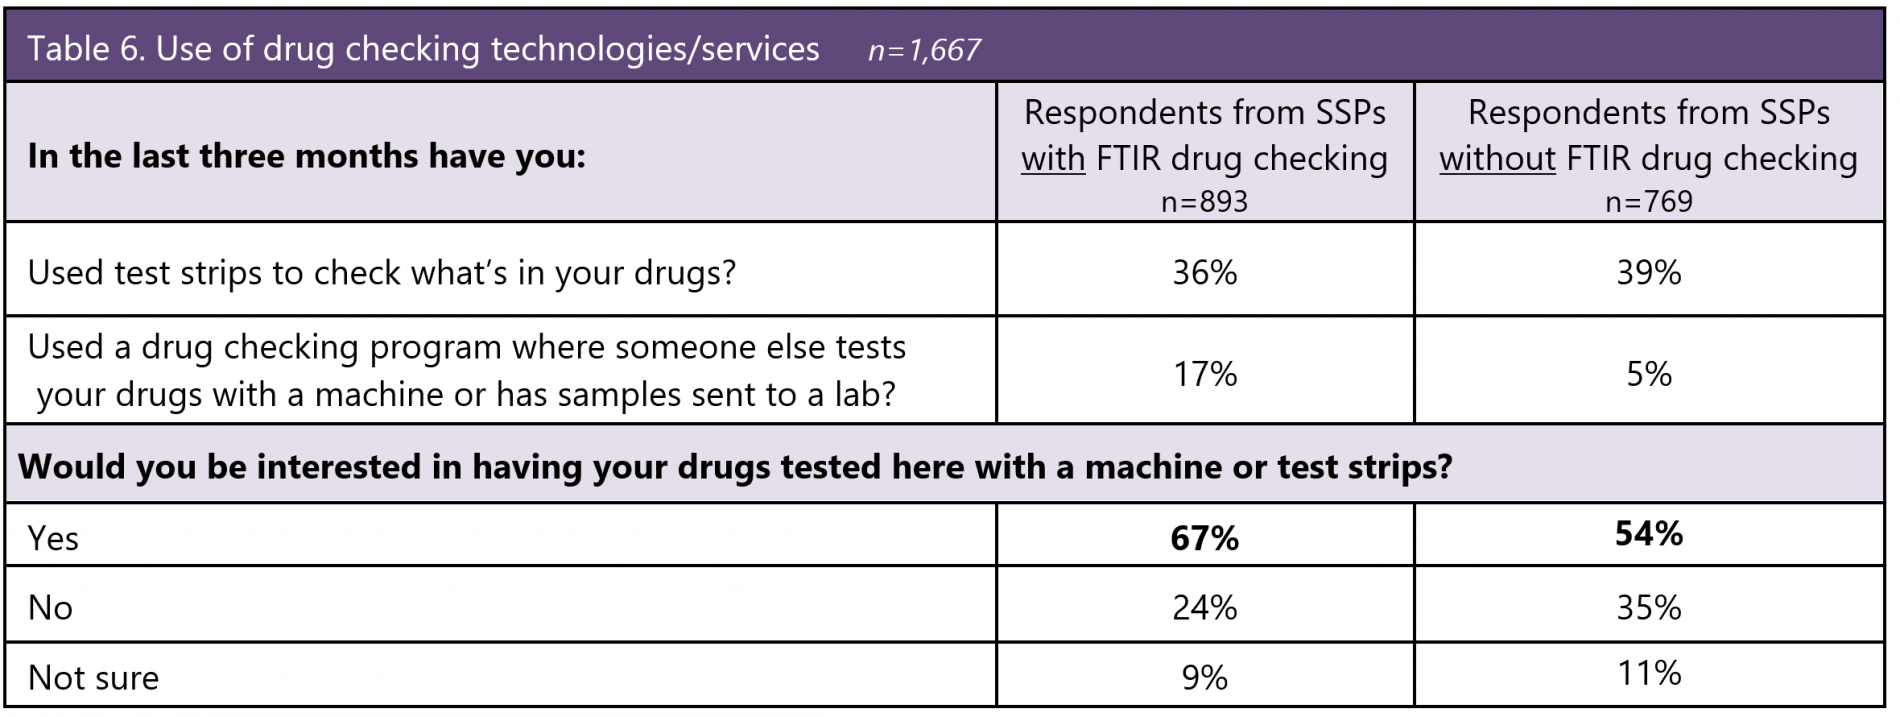 Table 6: Use of drug checking technologies/services, n=1667.